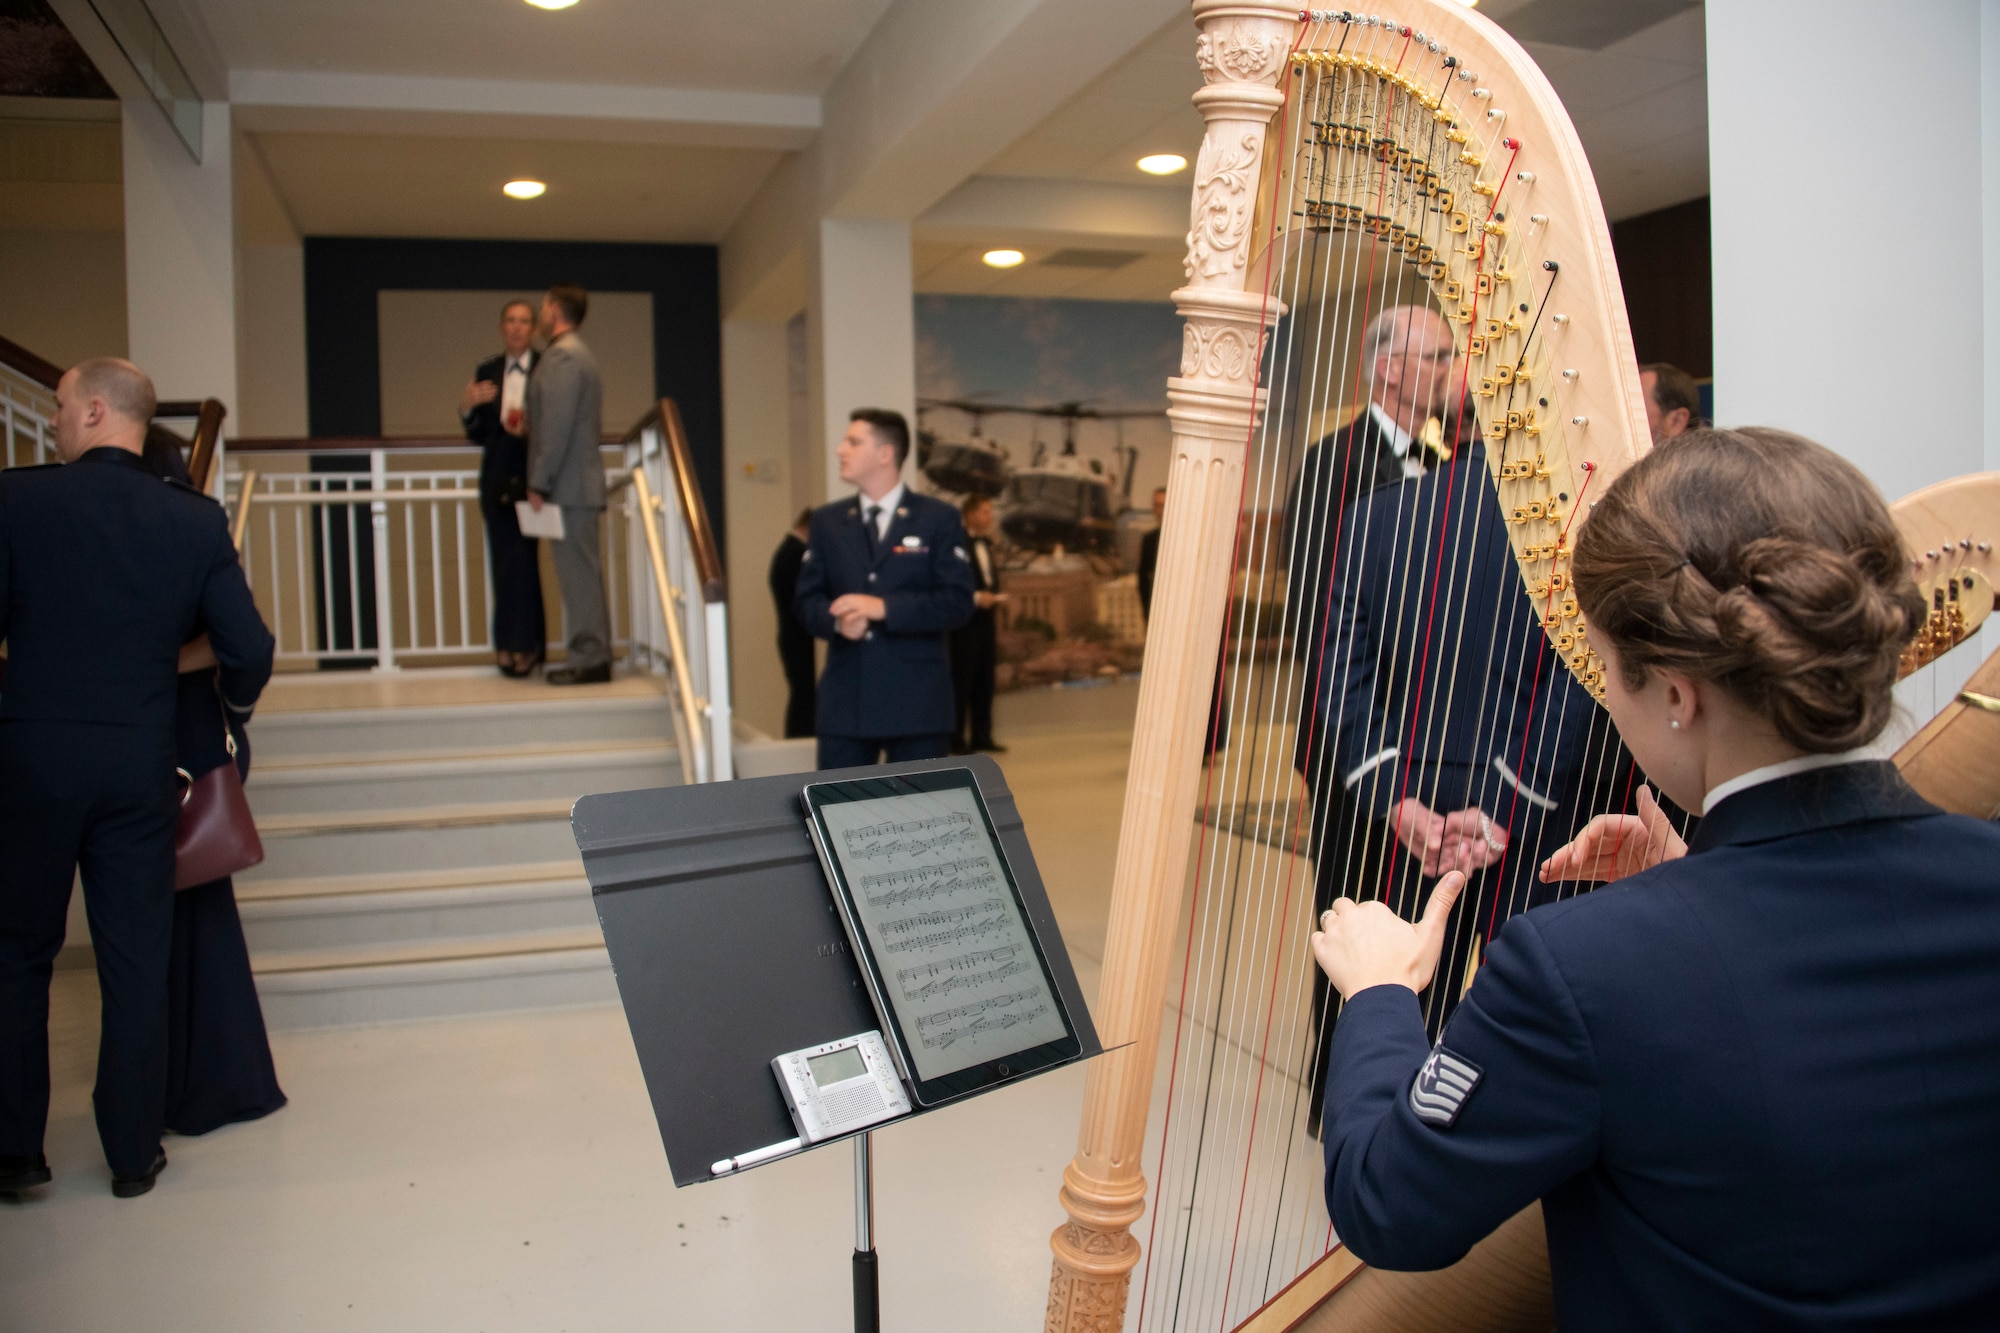 U.S. Air Force Tech. Sgt. Gréta K. Ásgeirsson, a U.S. Air Force Band principal harpist, plays during the opening of the 1st Helicopter Squadron’s 50th anniversary gala at Joint Base Andrews, Md., Dec. 6, 2019.